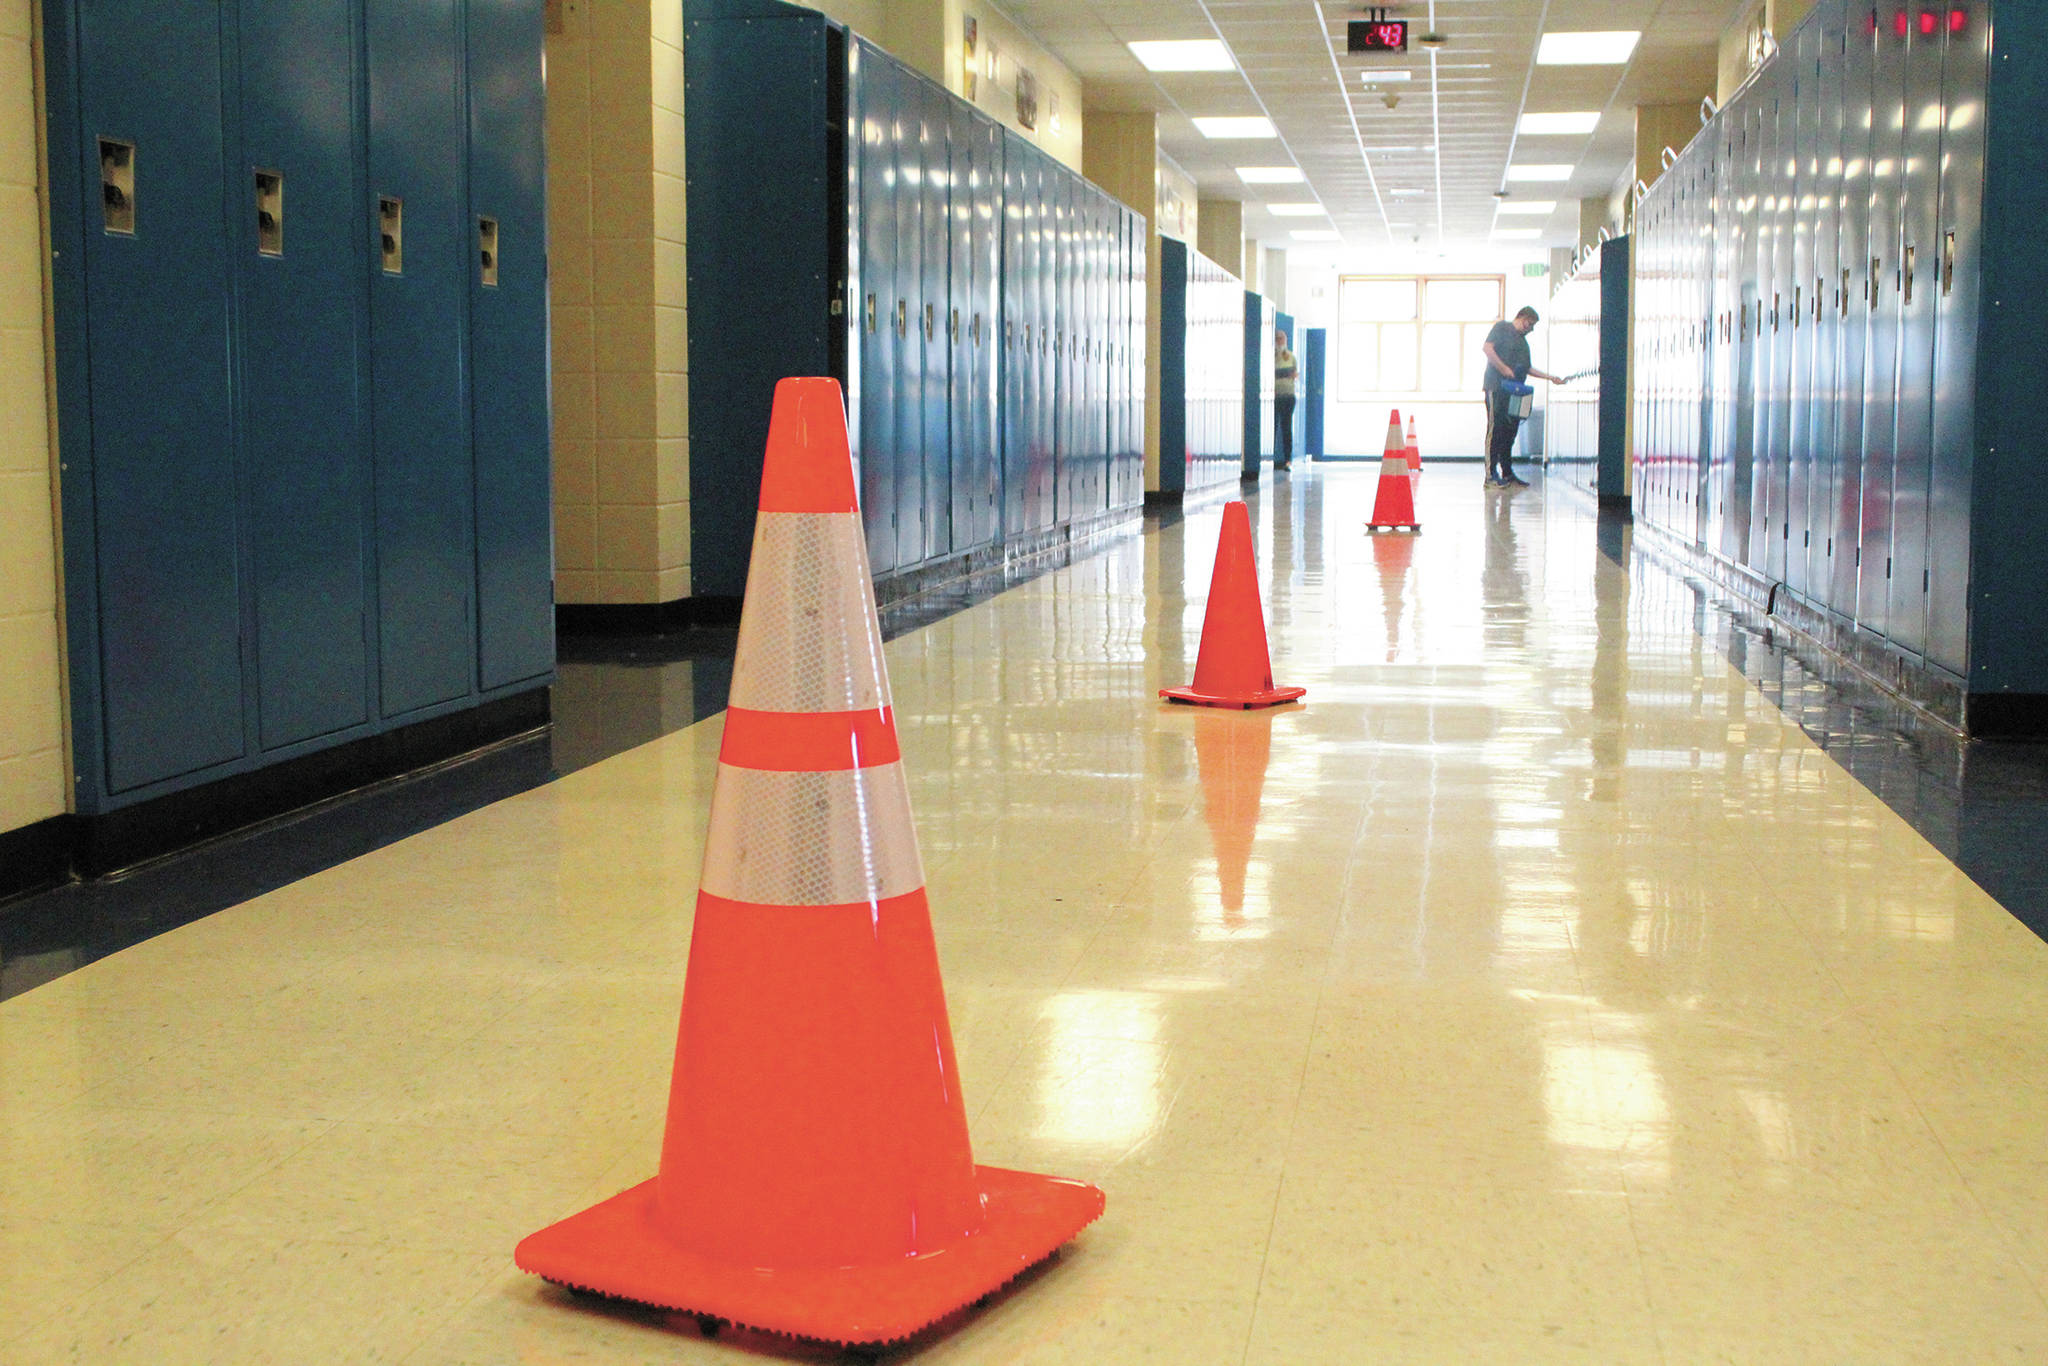 Orange cones mark the desired one-way traffic pattern down the hallways of Homer High School on Monday, Aug. 24, 2020 in Homer, Alaska. (Photo by Megan Pacer/Homer News)